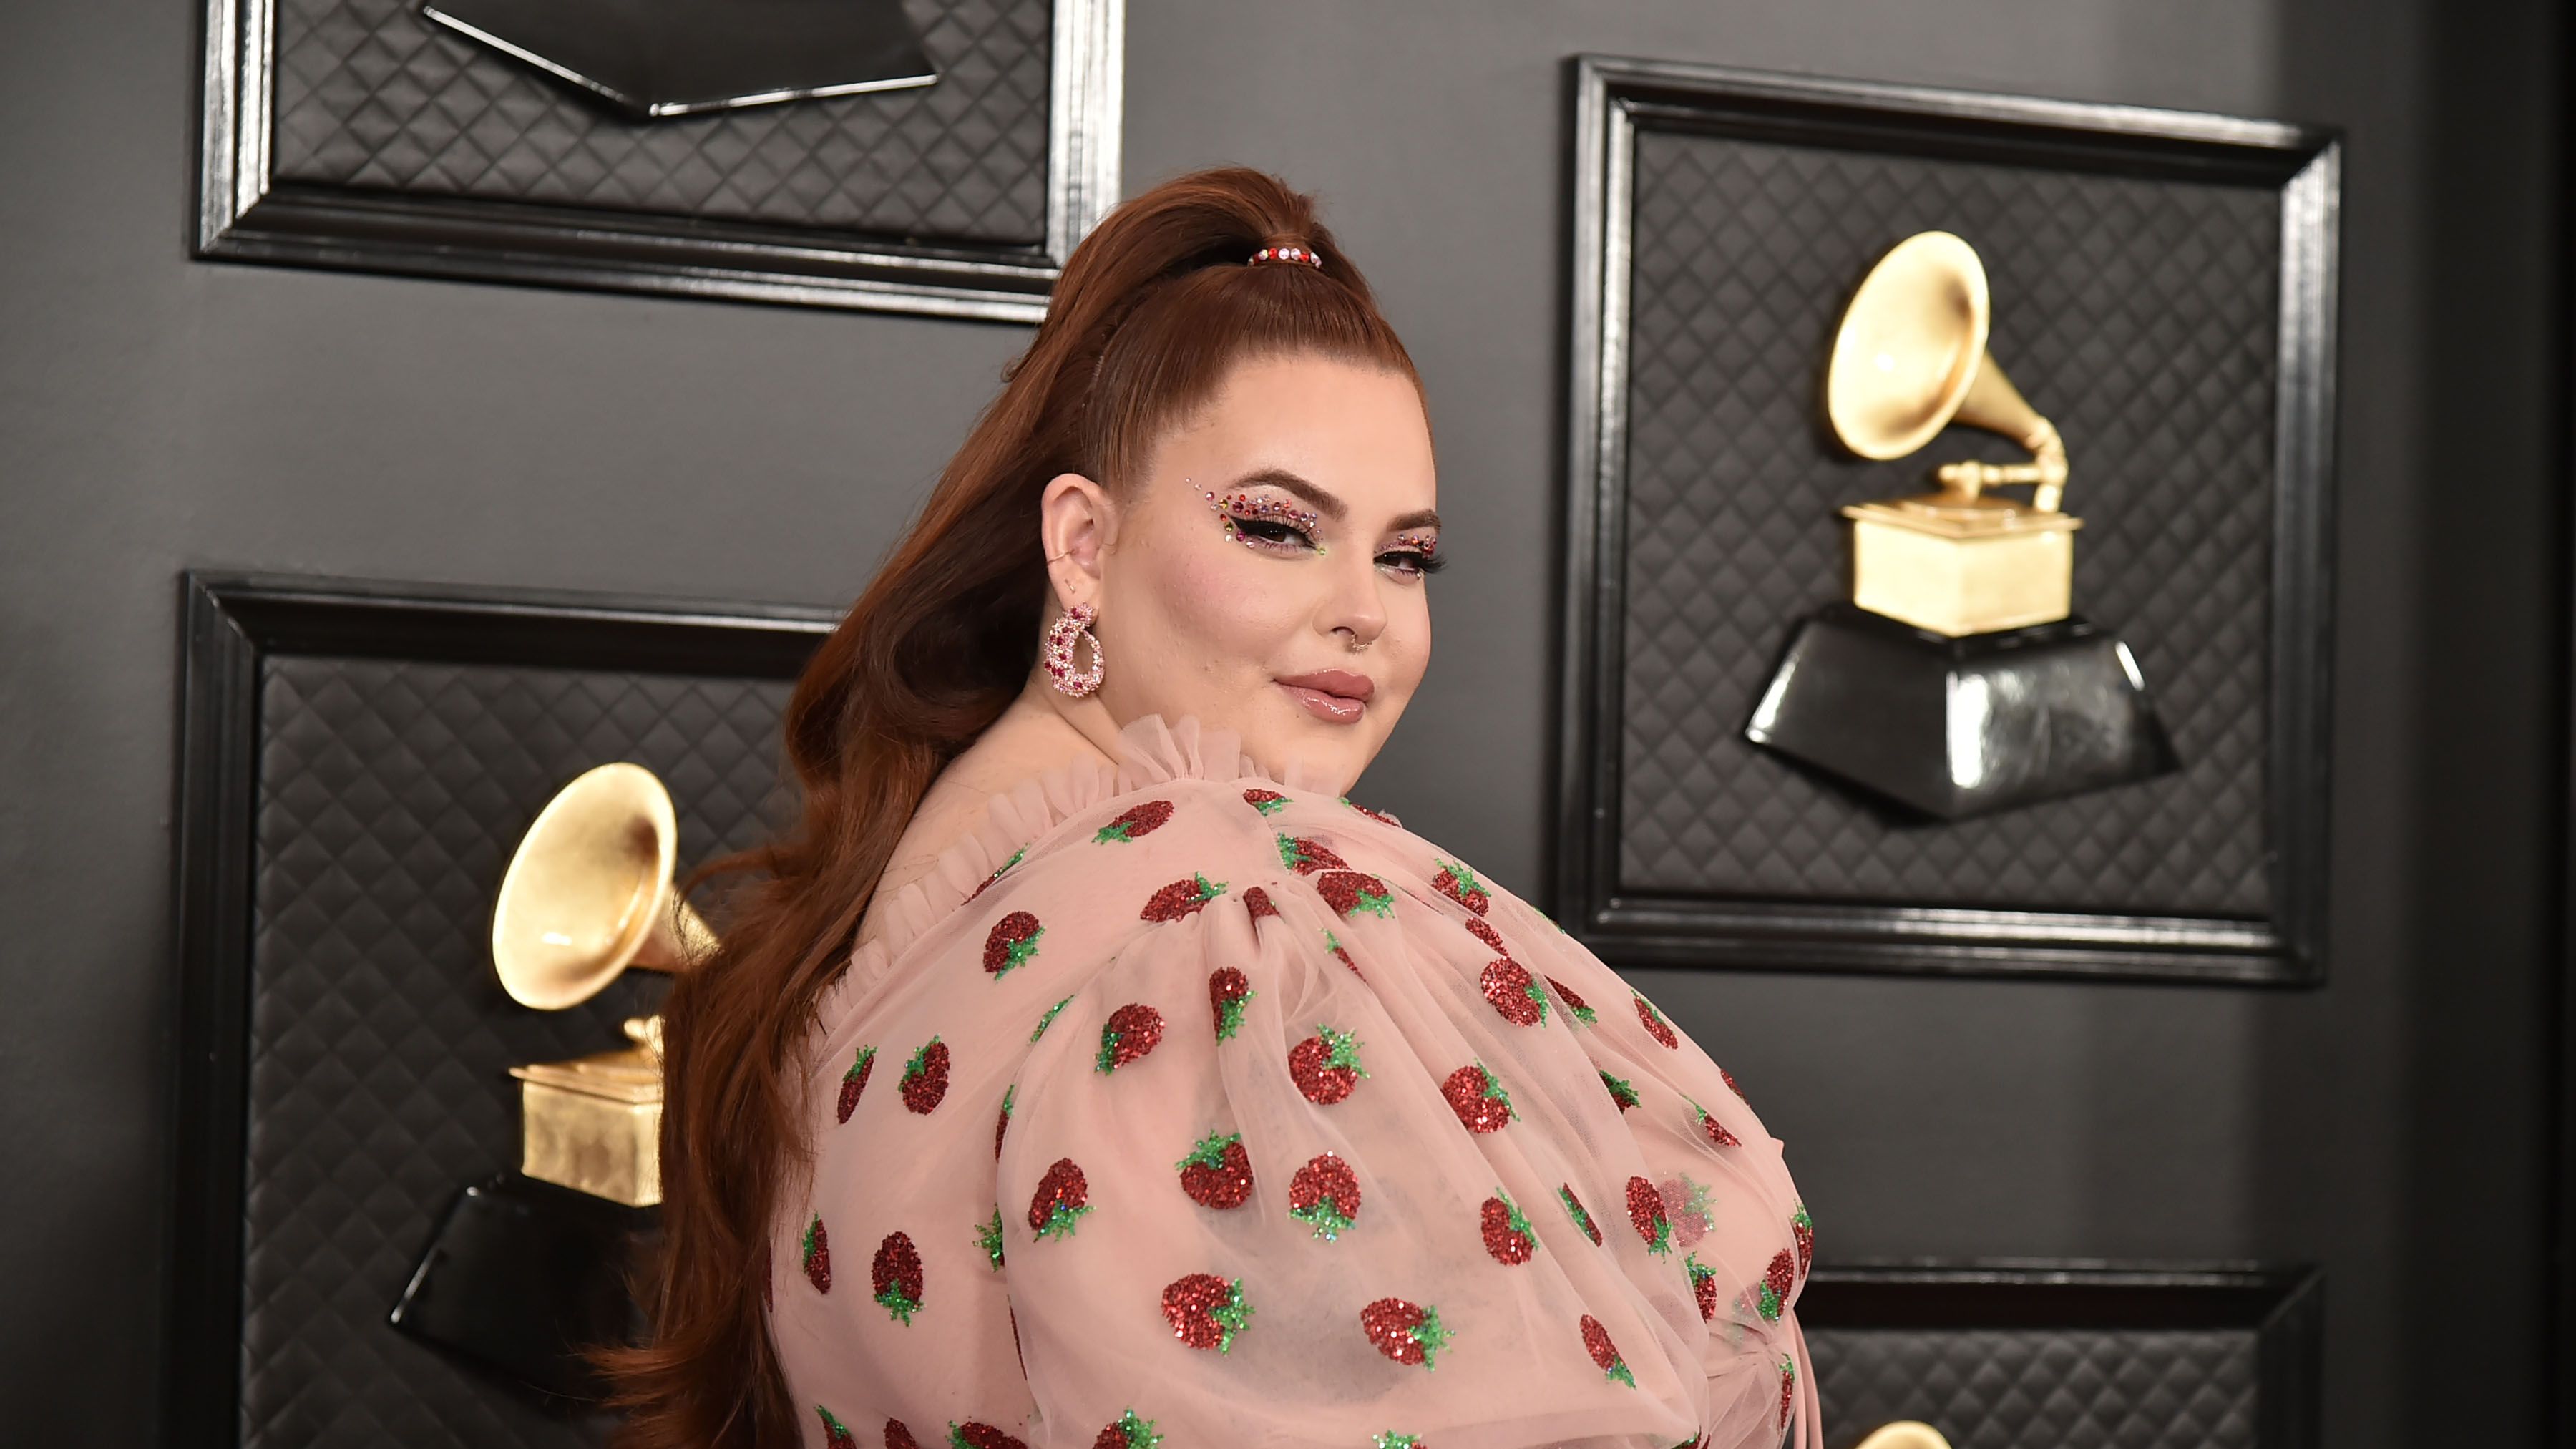 Tess Holliday on Why Our Mental Health Matters Now More Than Ever